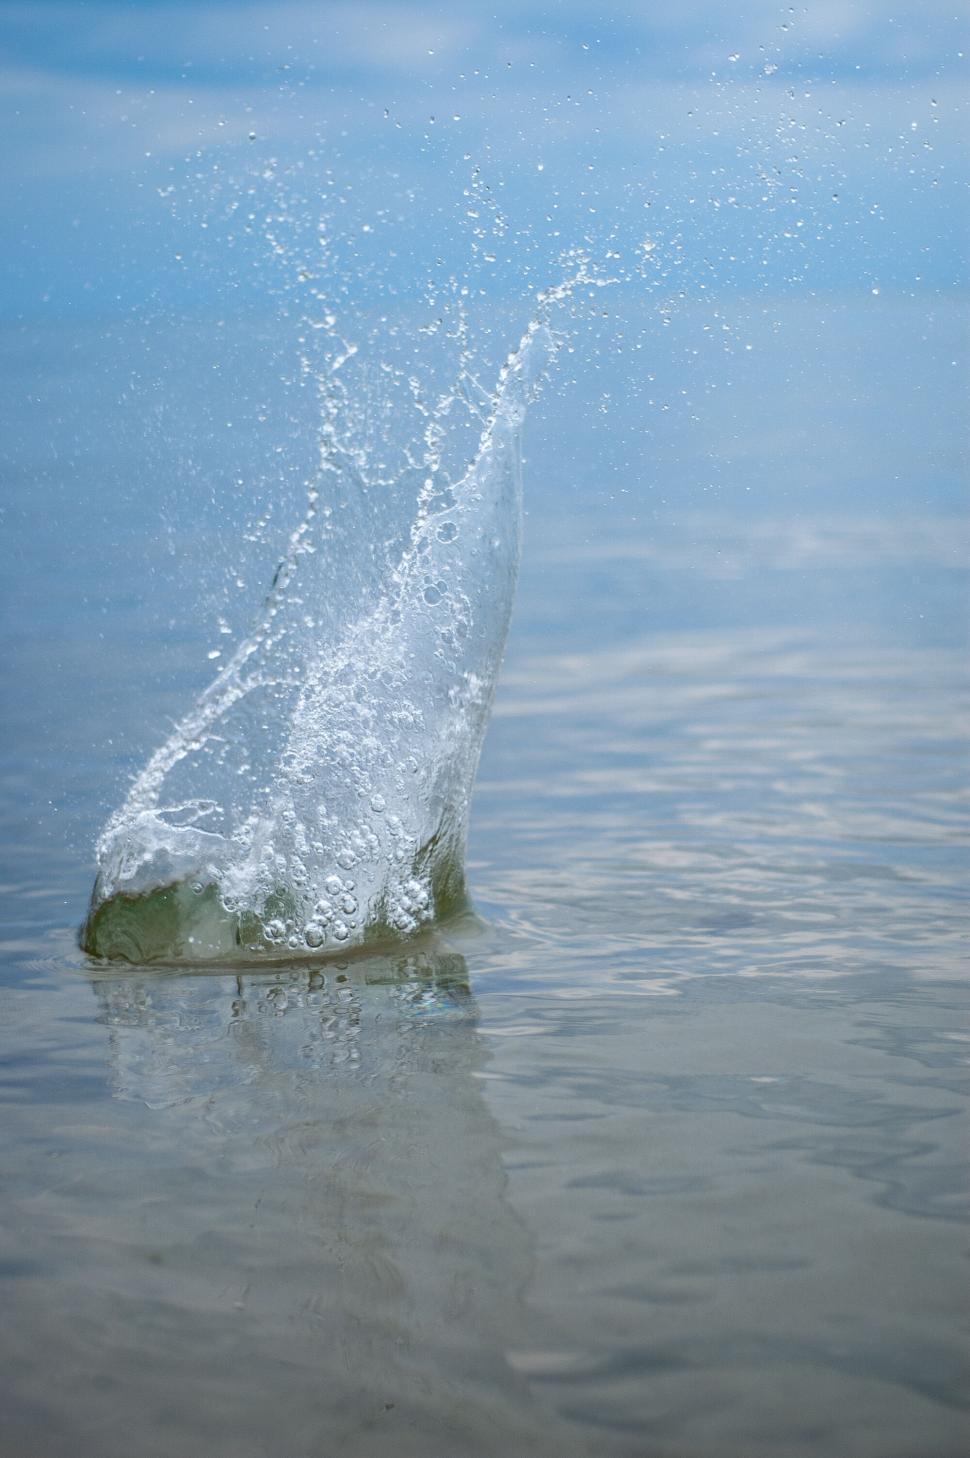 Free Image of Splash in water with a rock falling into it 